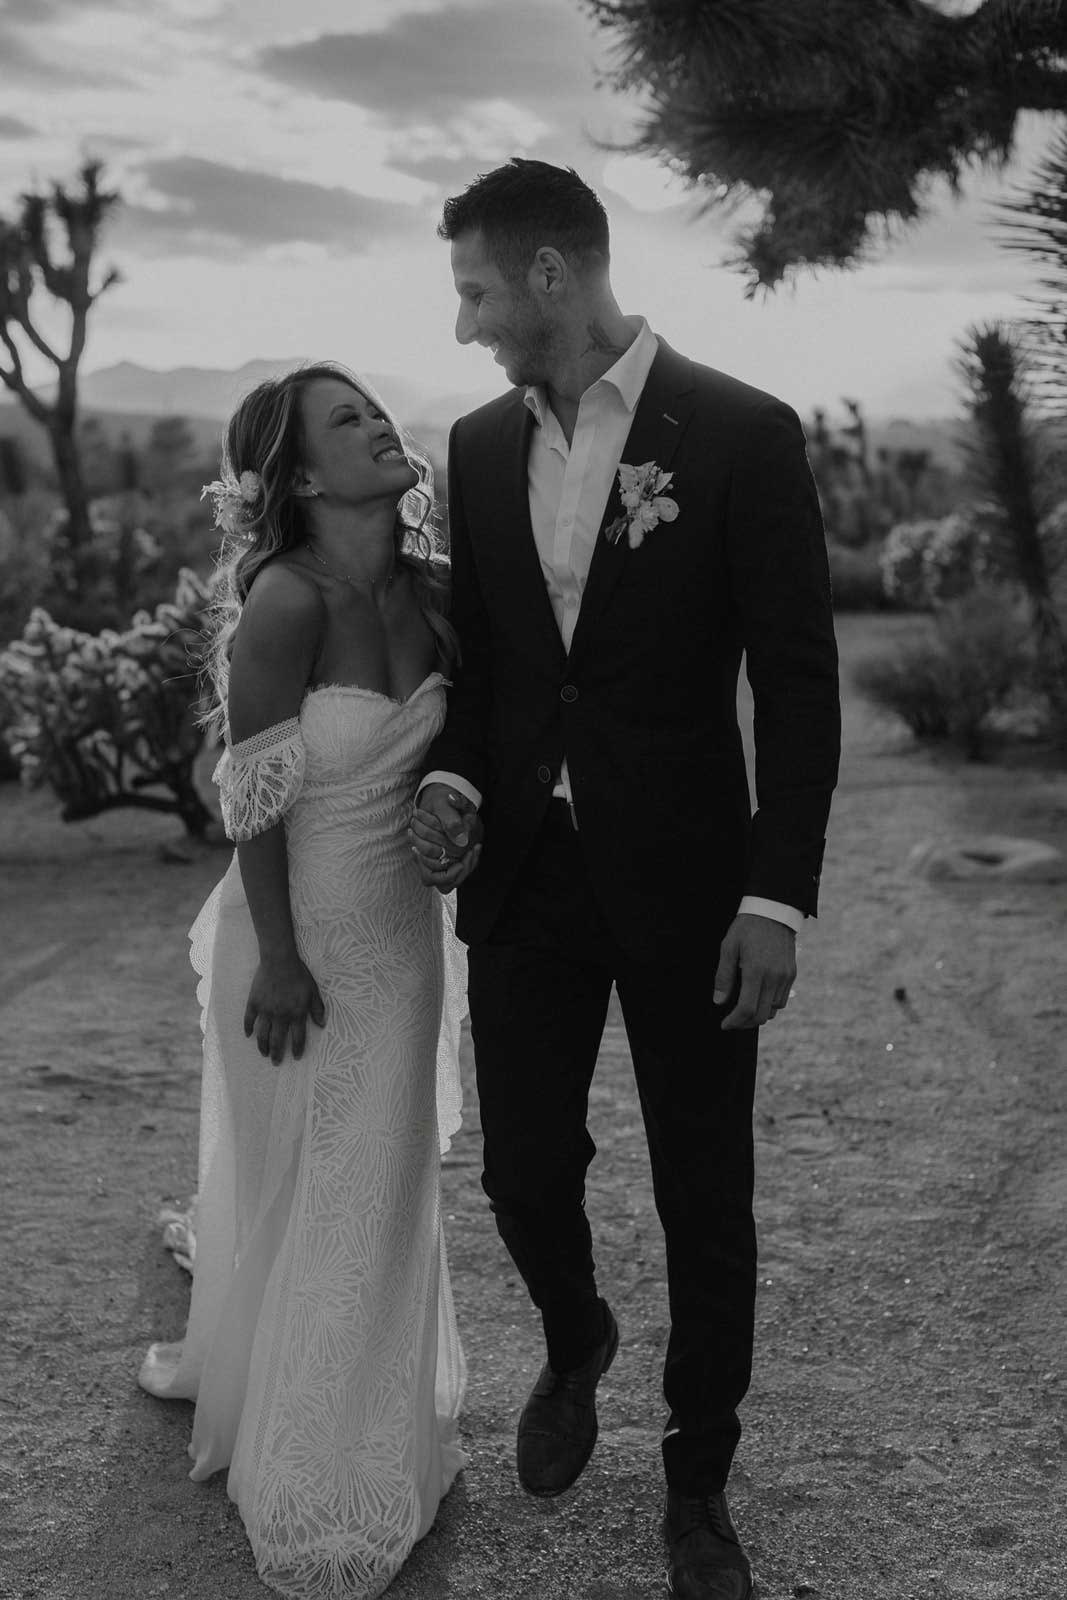 Black and White image of Bride and Groom laughing together